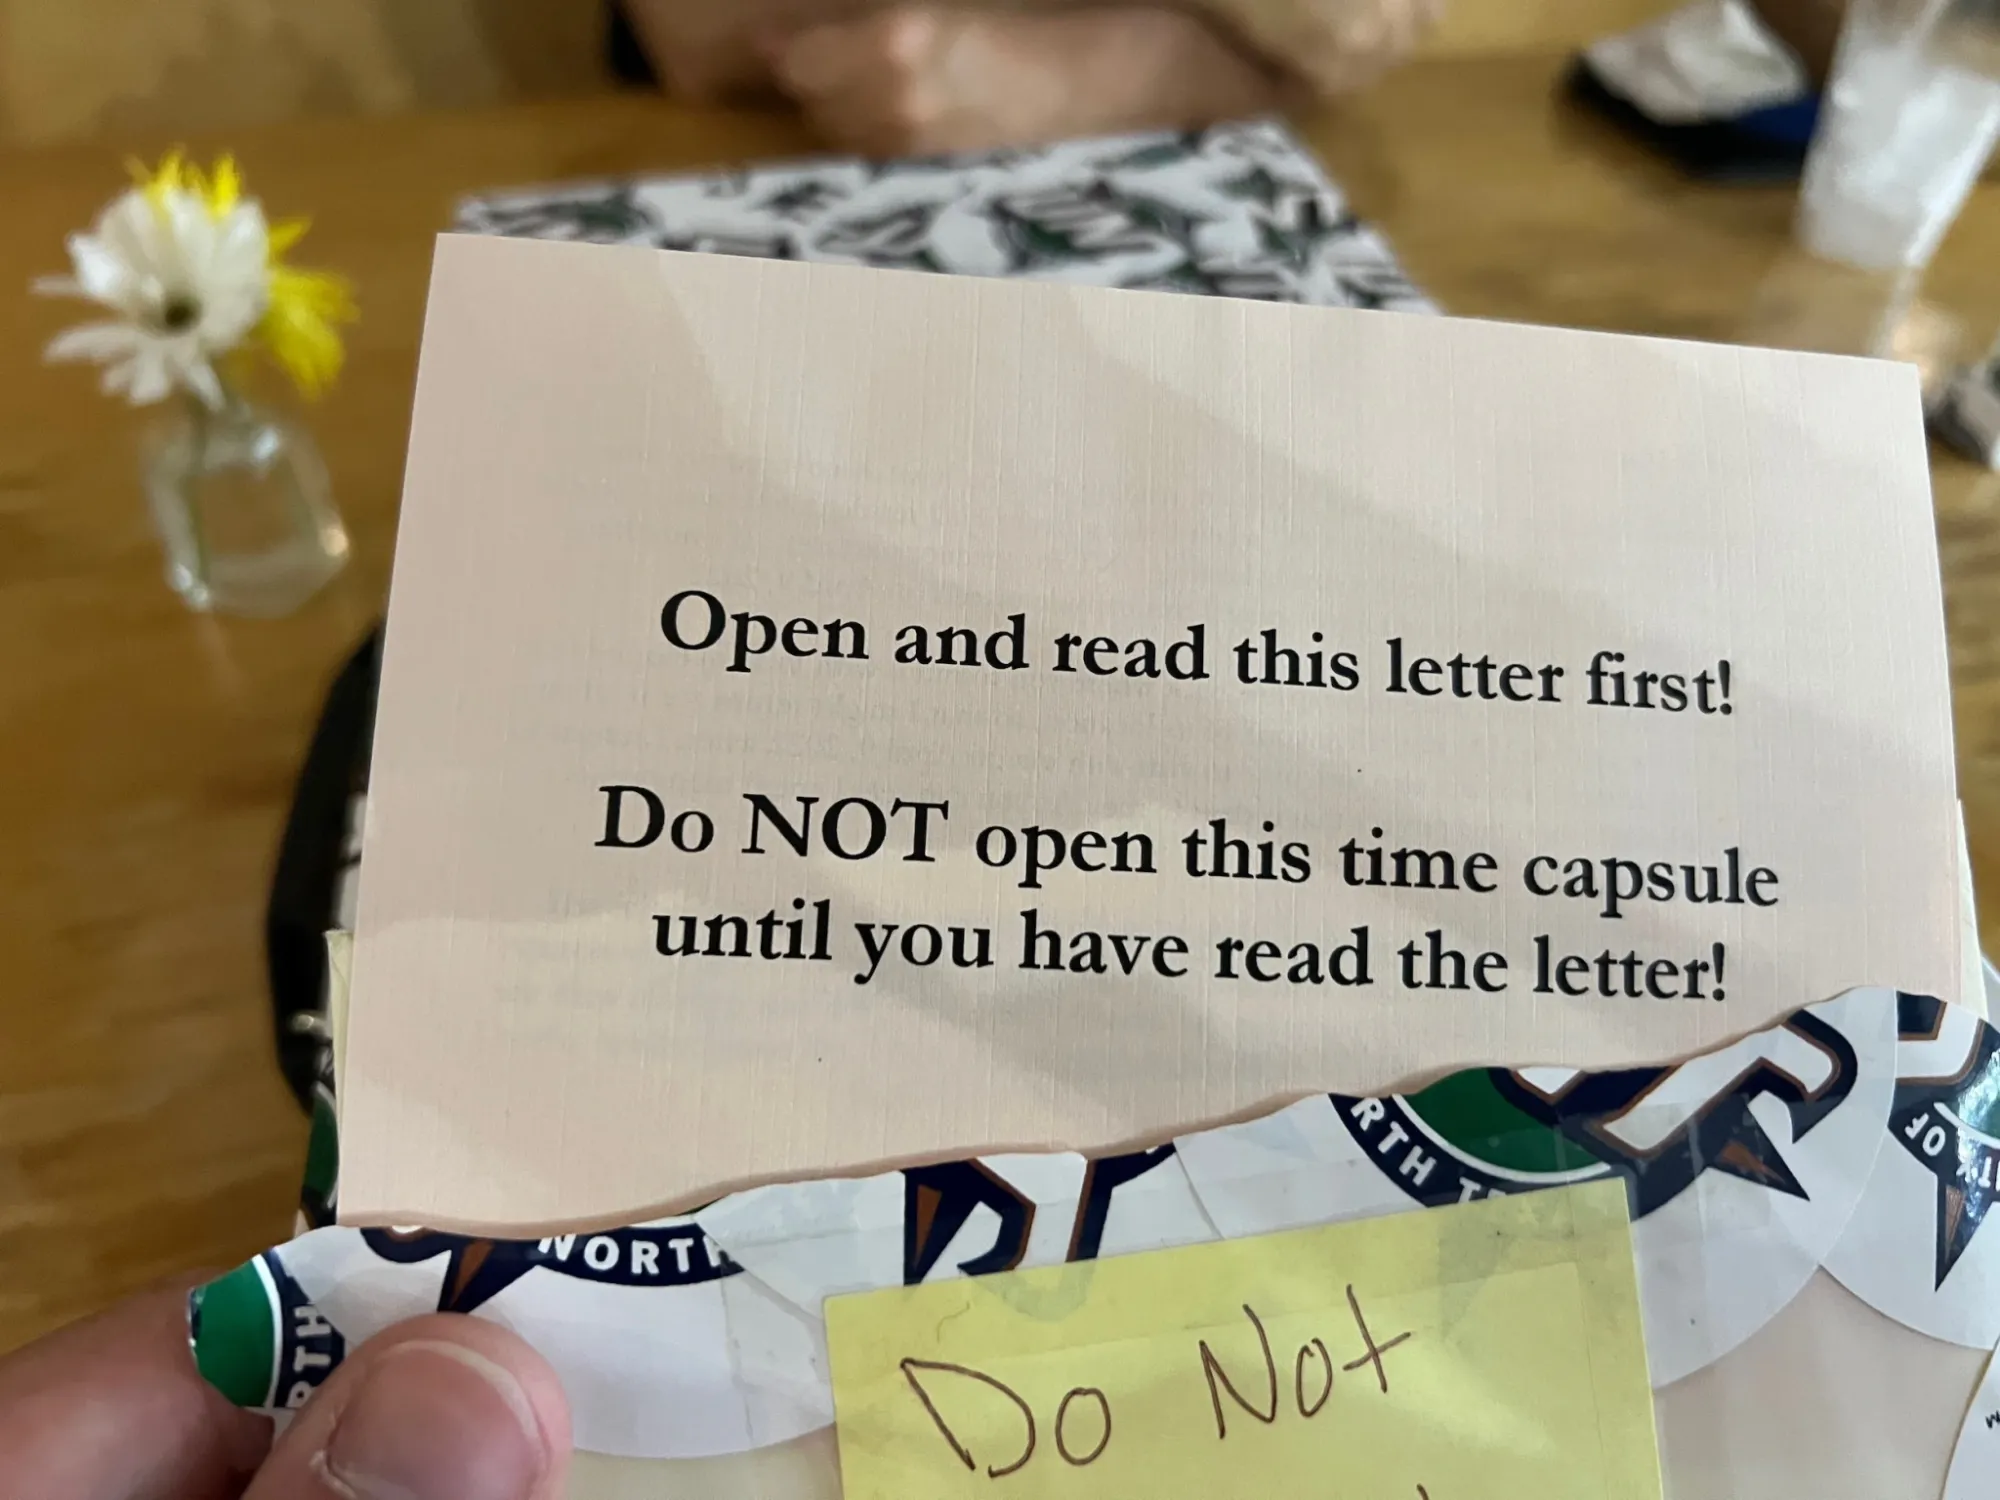 Paper that reads "Open and read this letter first! Do NOT open this time capsule until you have read the letter!"